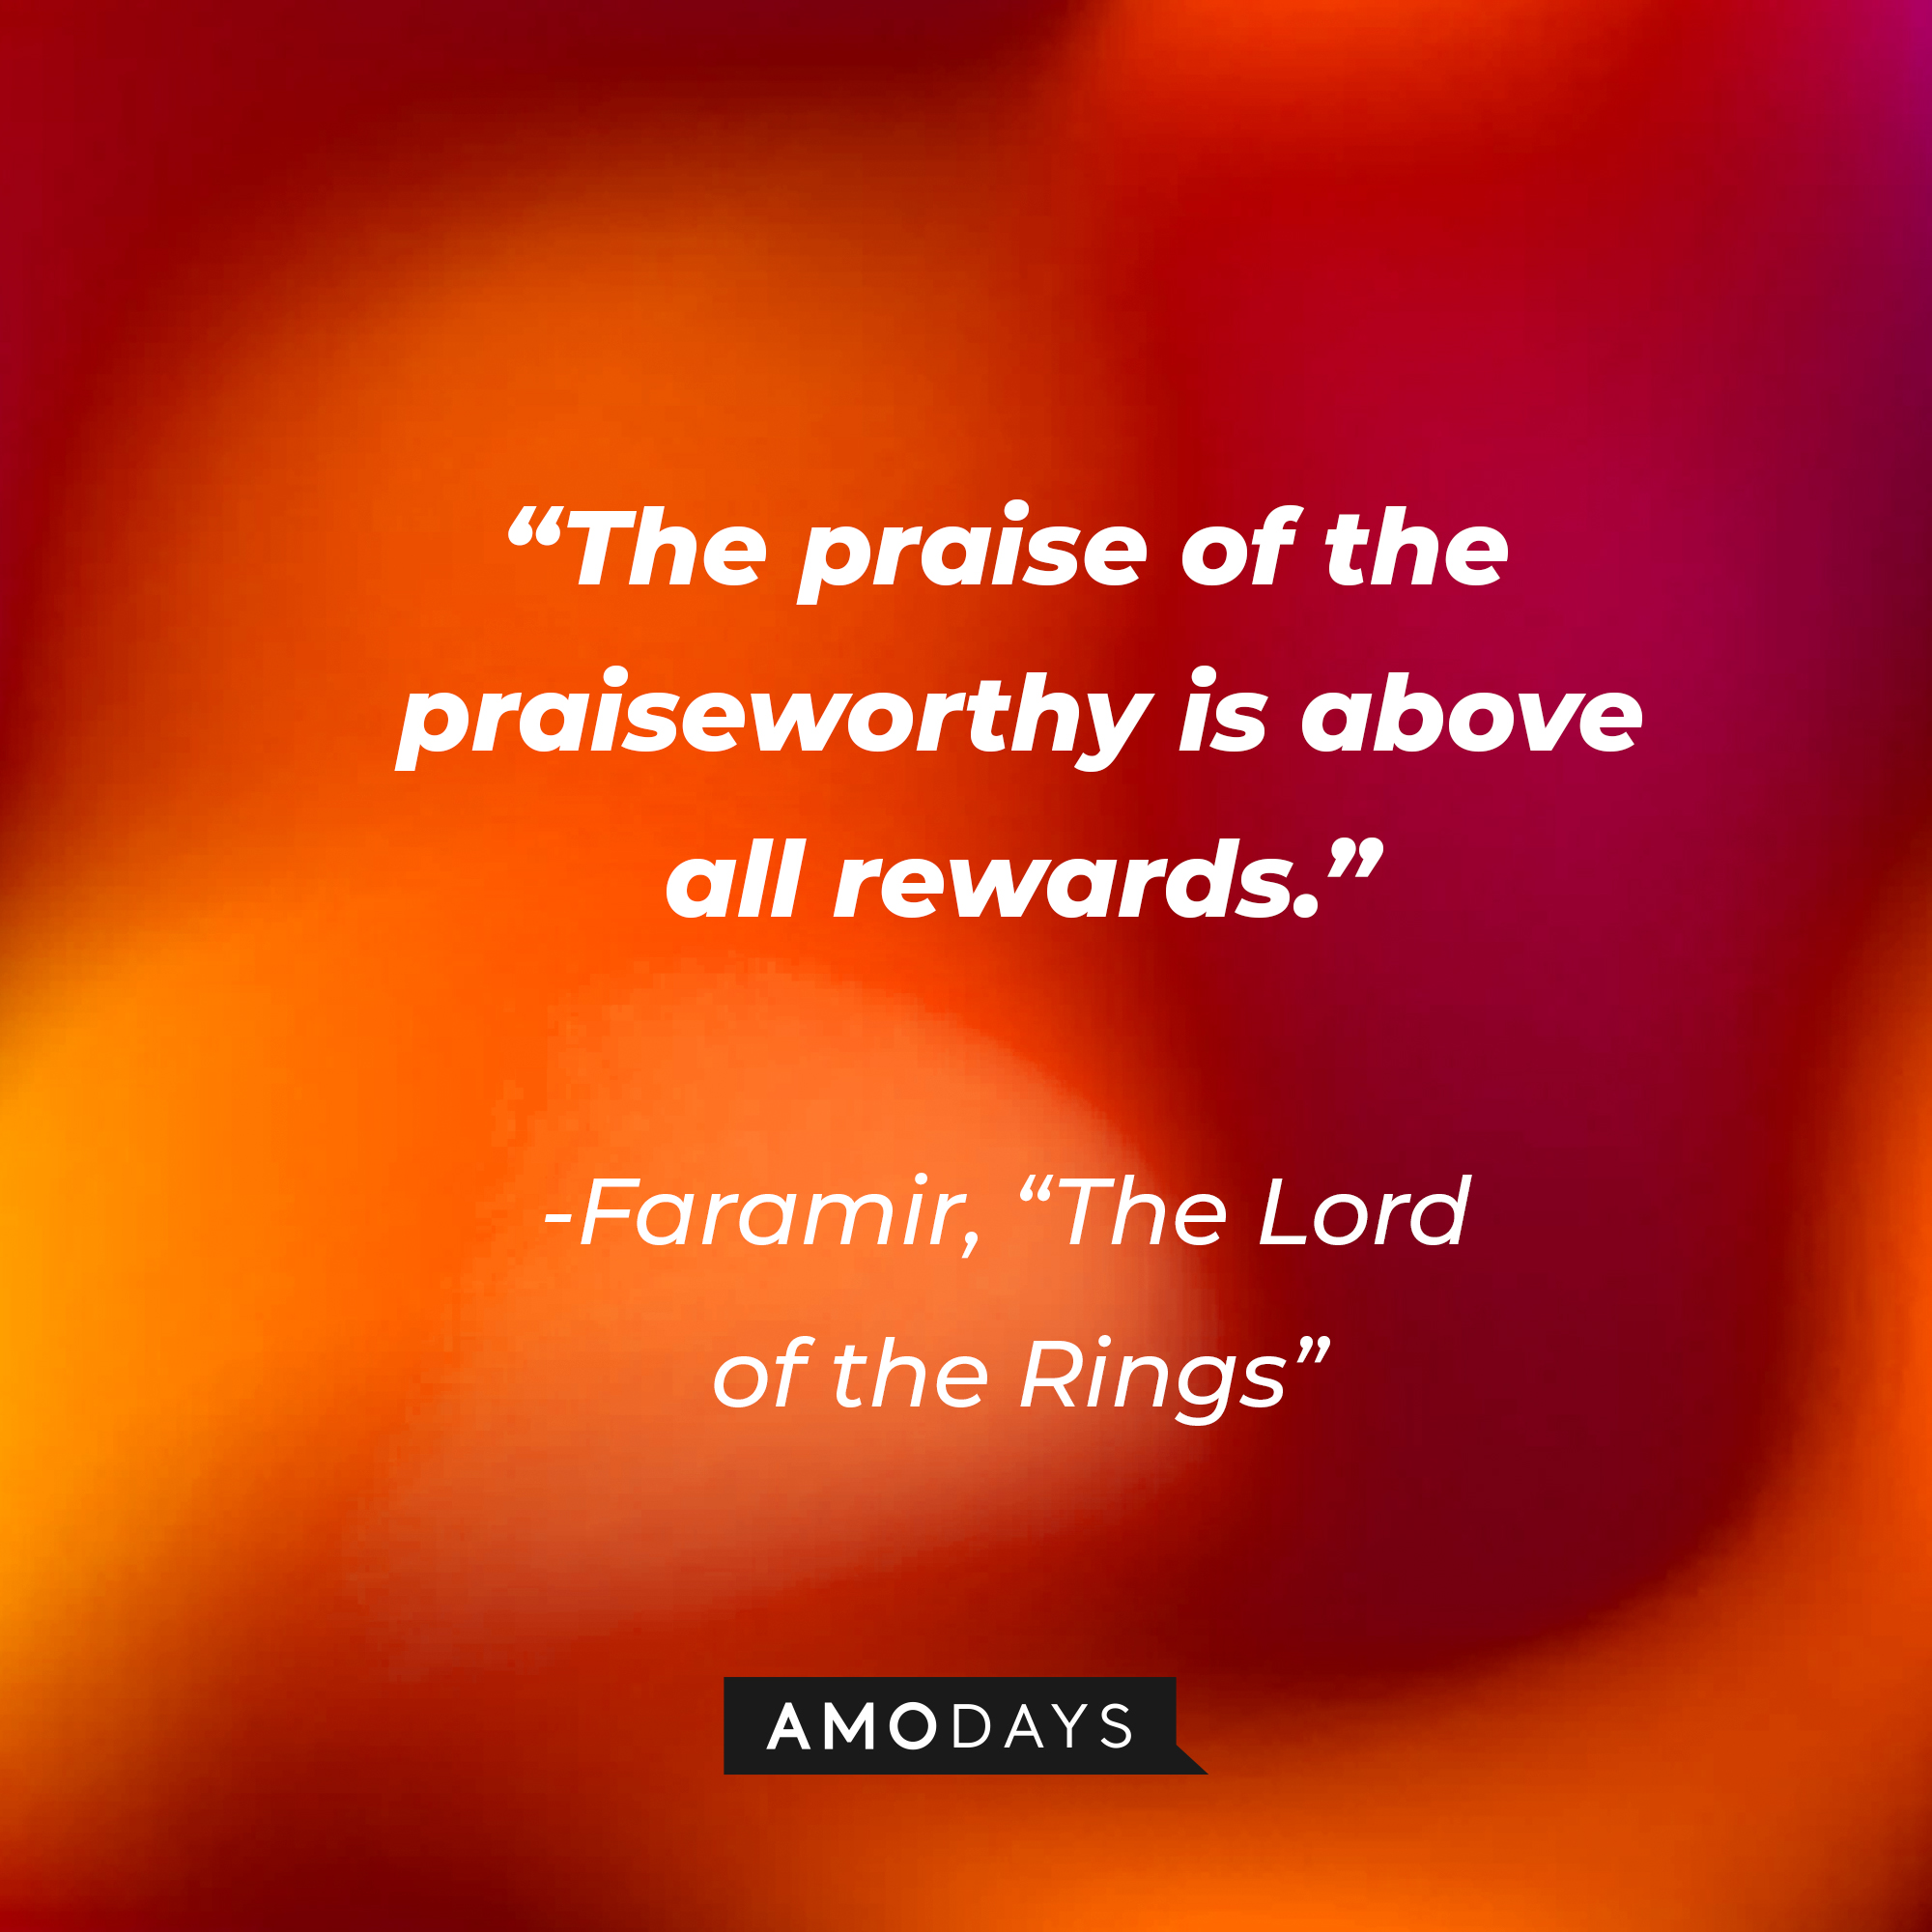 Faramir's quote from "The Lord of the Rings": "The praise of the praiseworthy is above all rewards." | Source: AmoDays